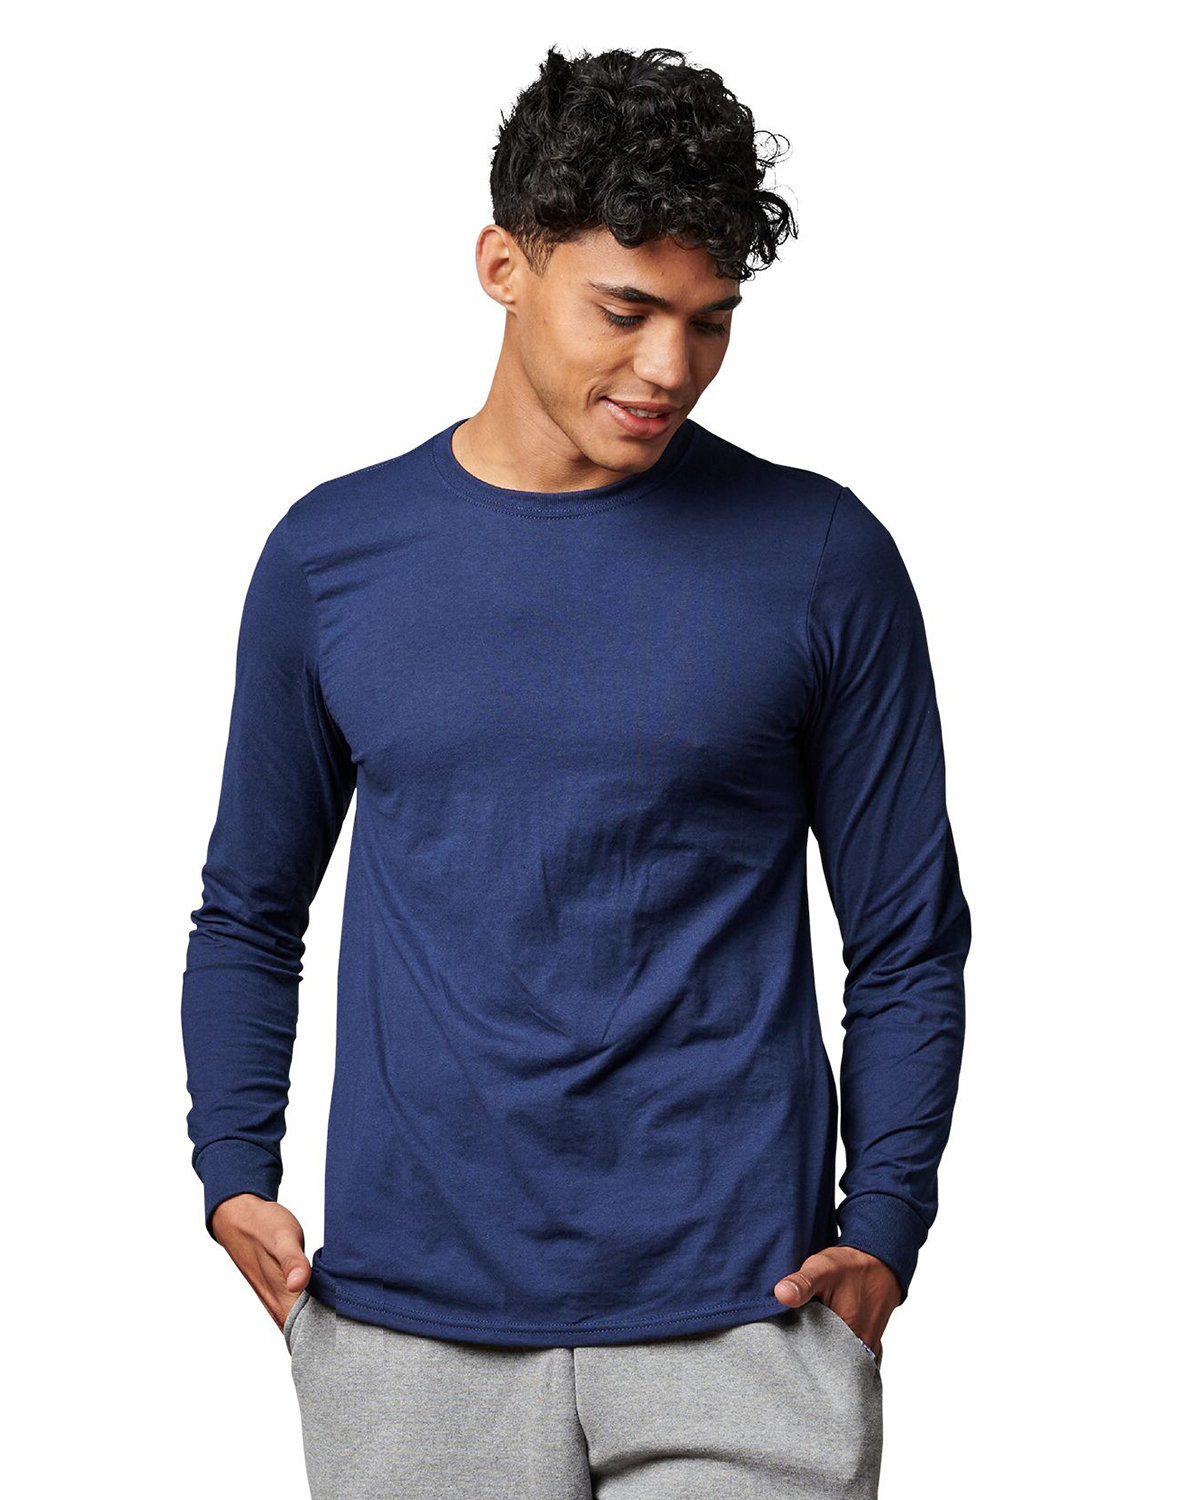 Russell Athletic Unisex Cotton Classic Long-Sleeve T-Shirt NAVY 